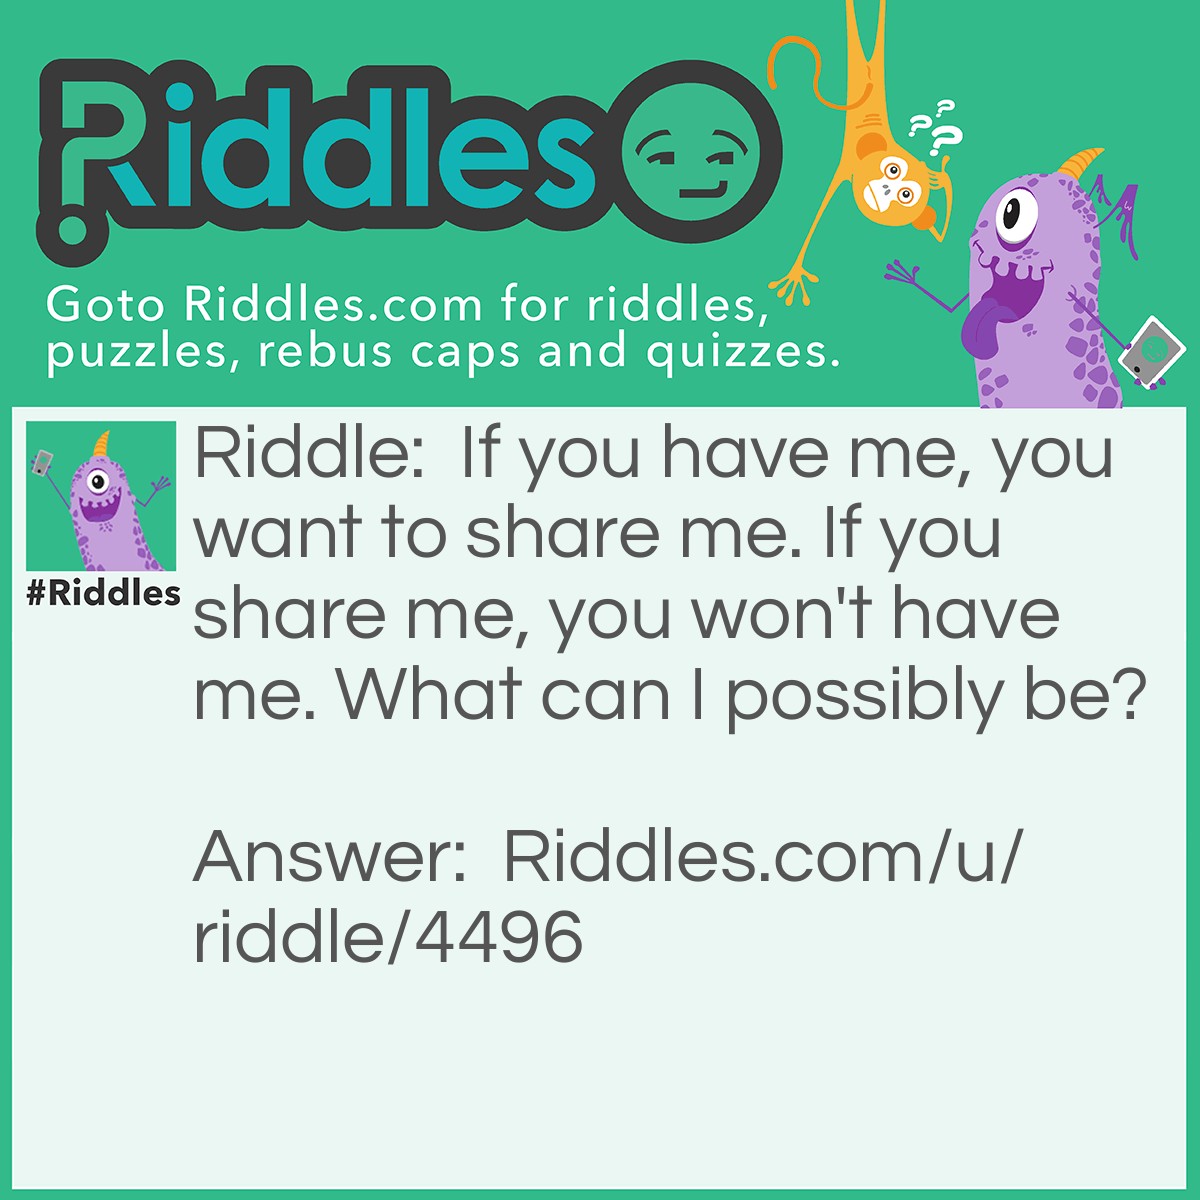 Riddle: If you have me, you want to share me. If you share me, you won't have me. What can I possibly be? Answer: A secret.